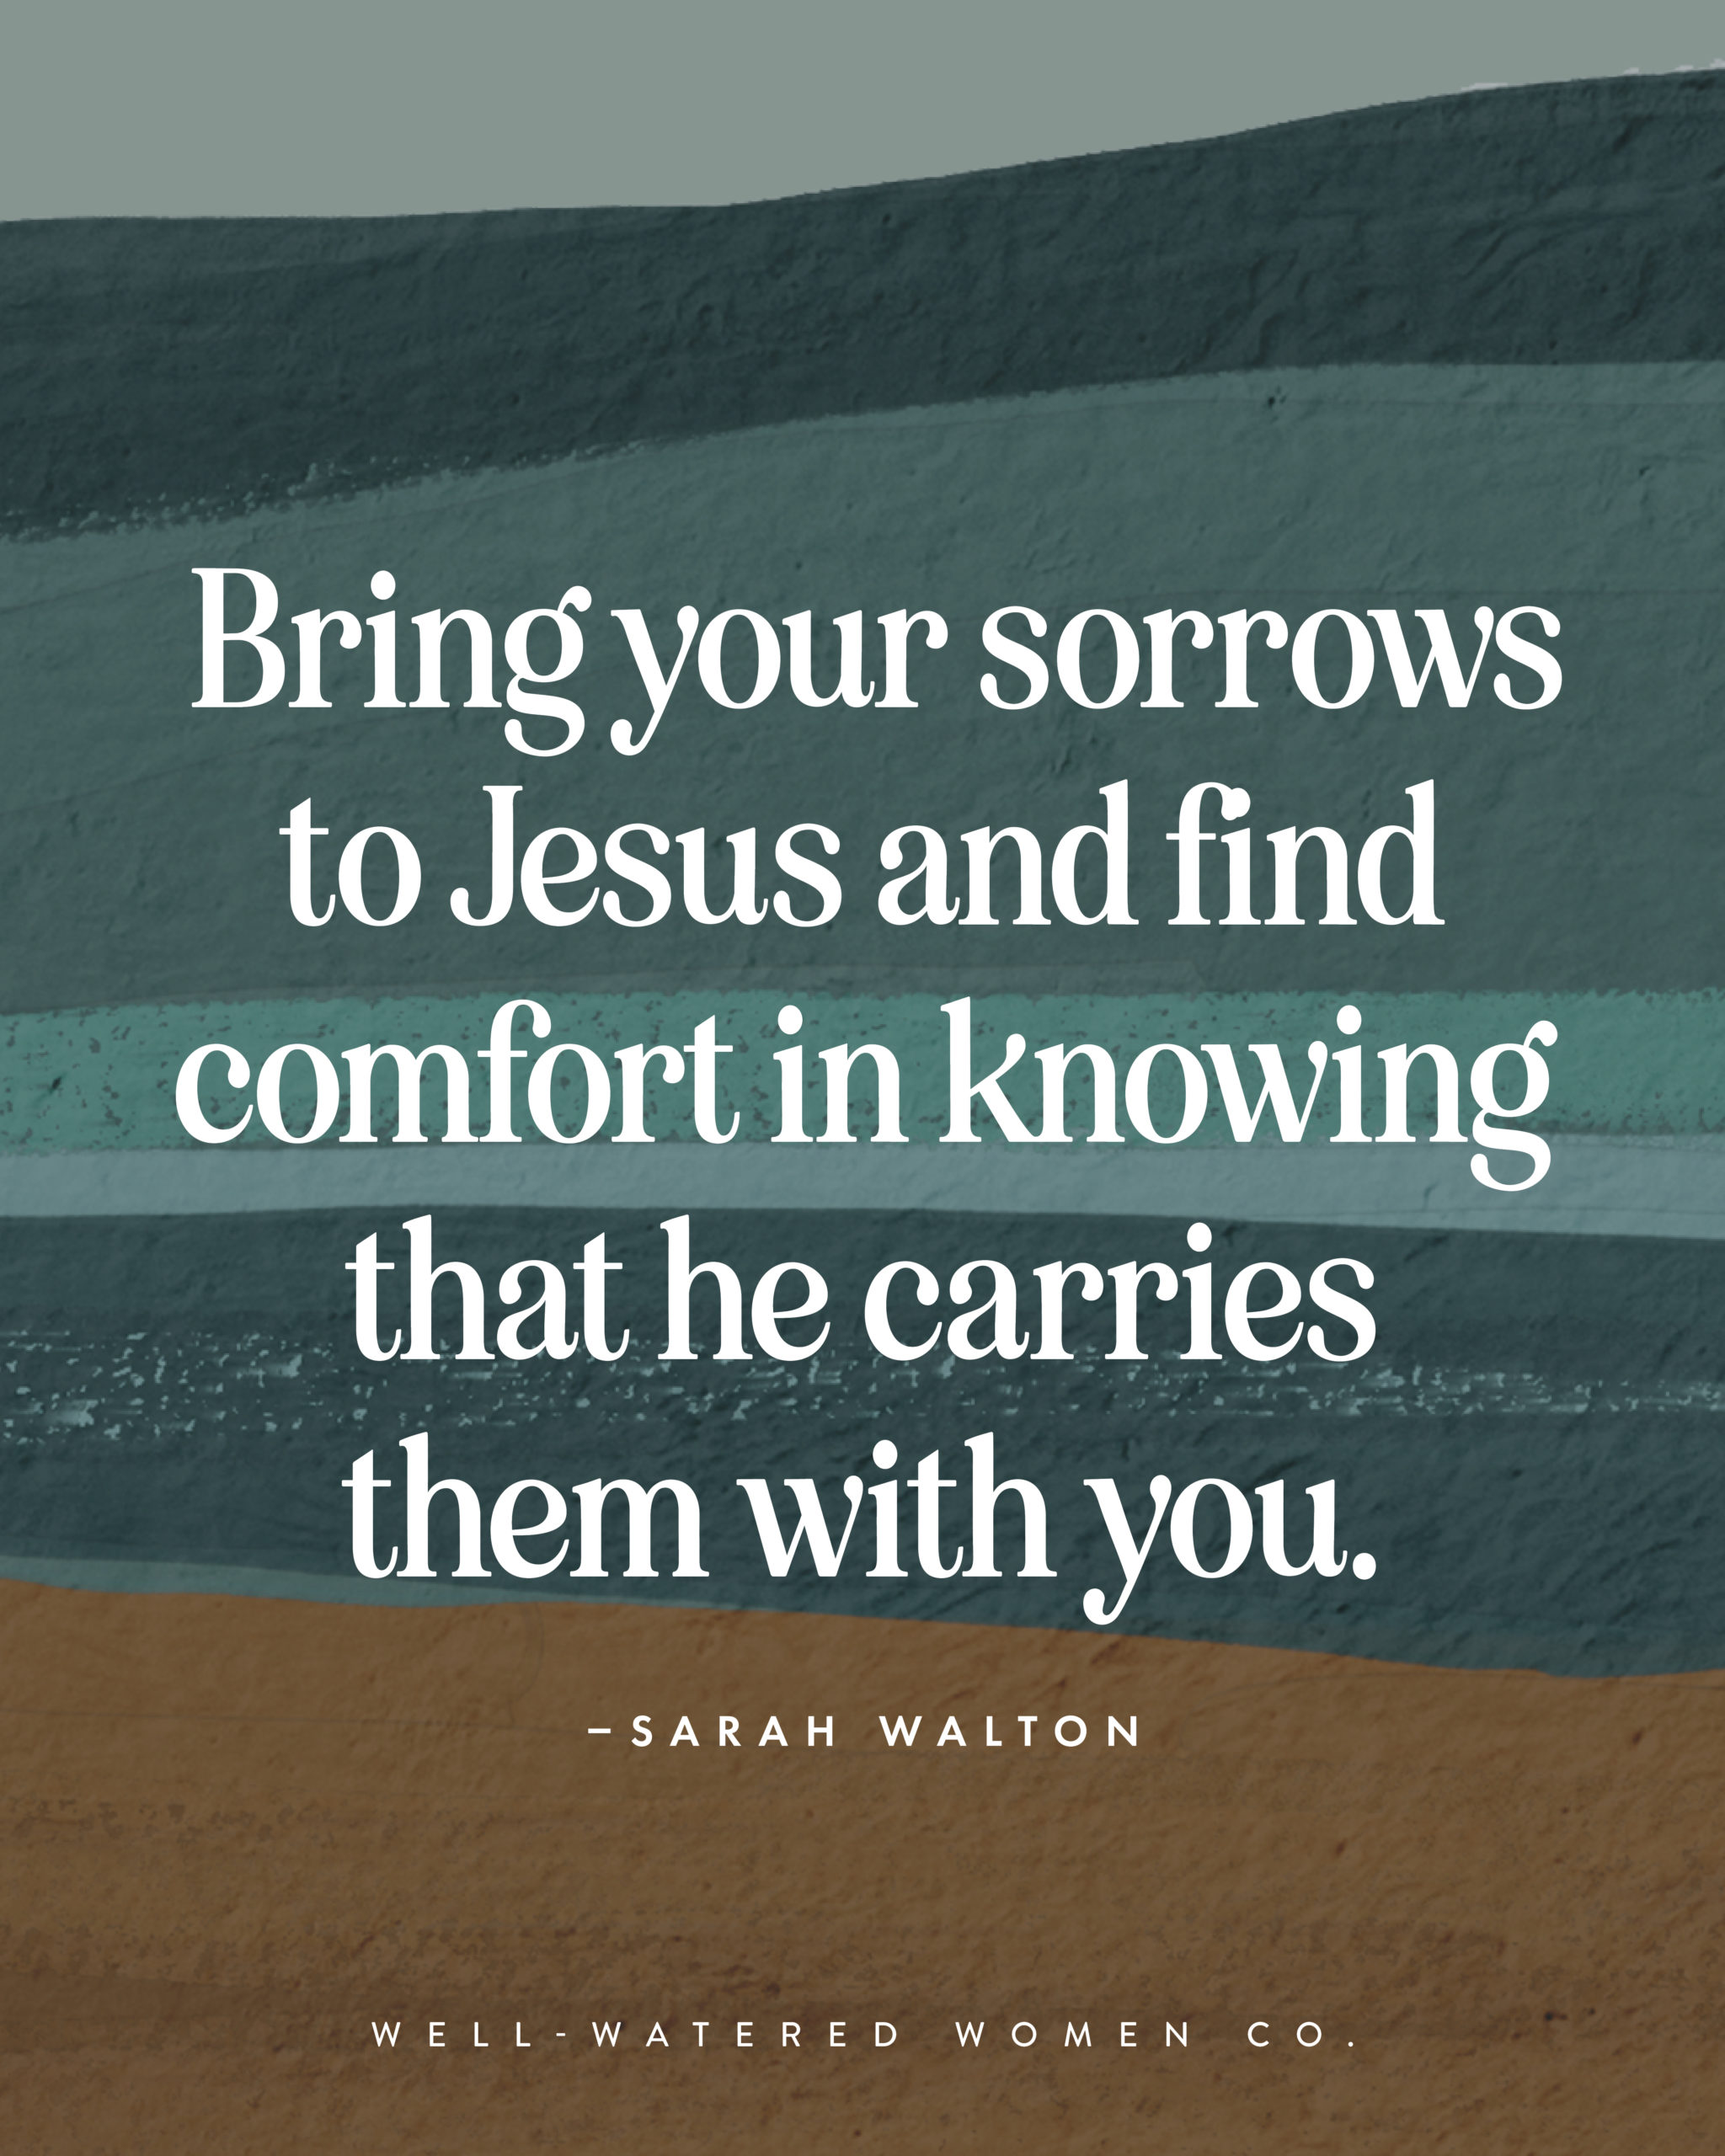 Refreshed by the Shared Sufferings of Christ - an article from Well-Watered Women - quote